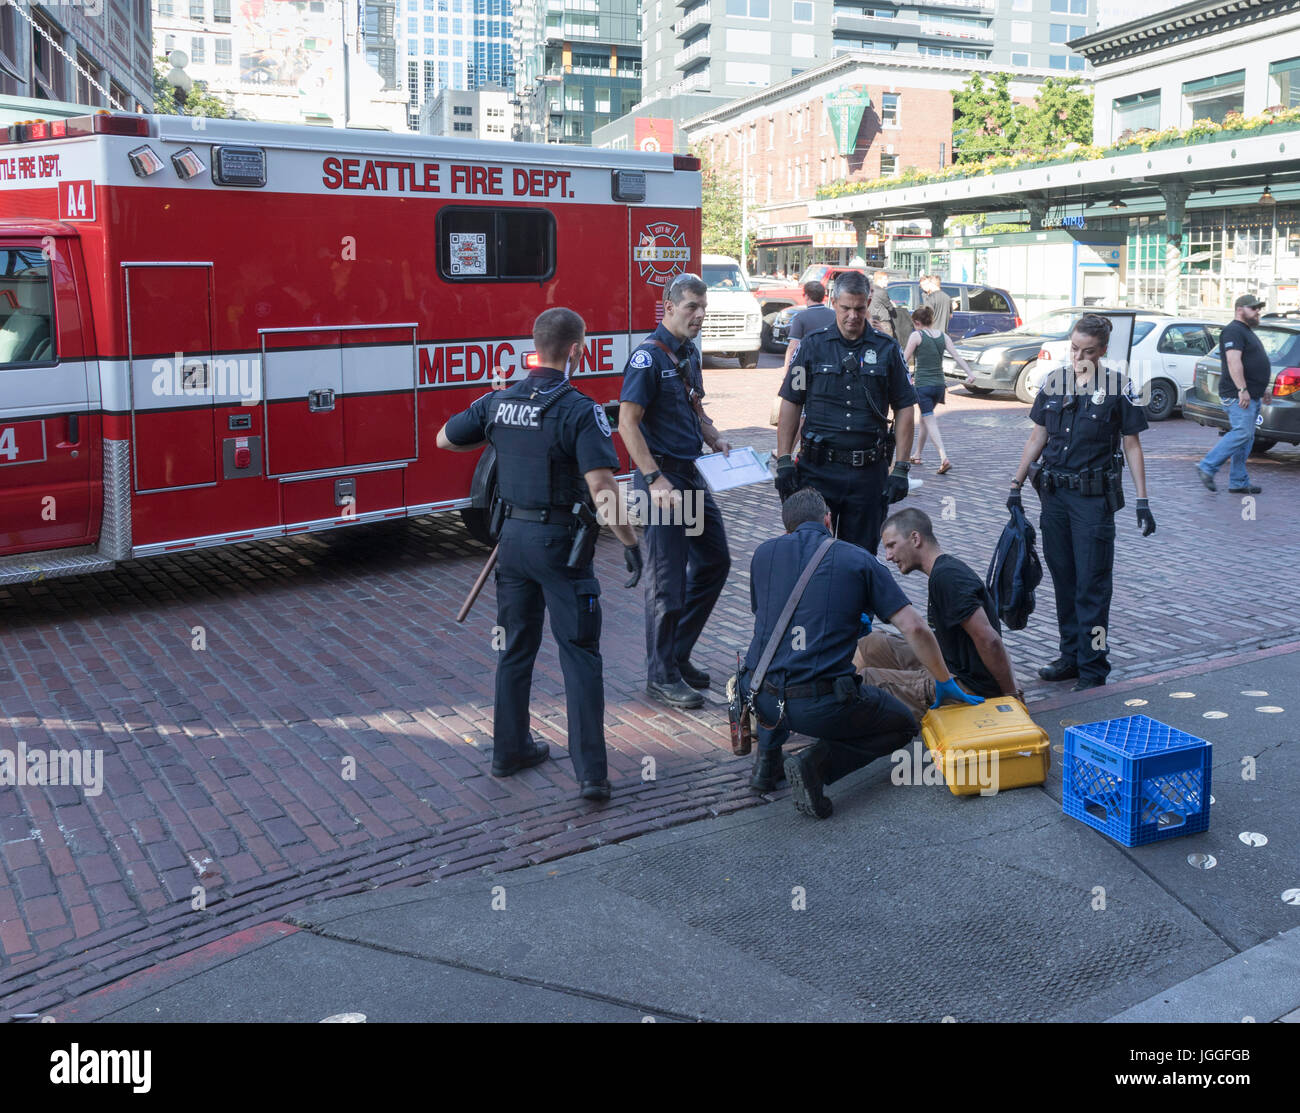 police surround arrested and handcuffed man, Seattle, USA Stock Photo